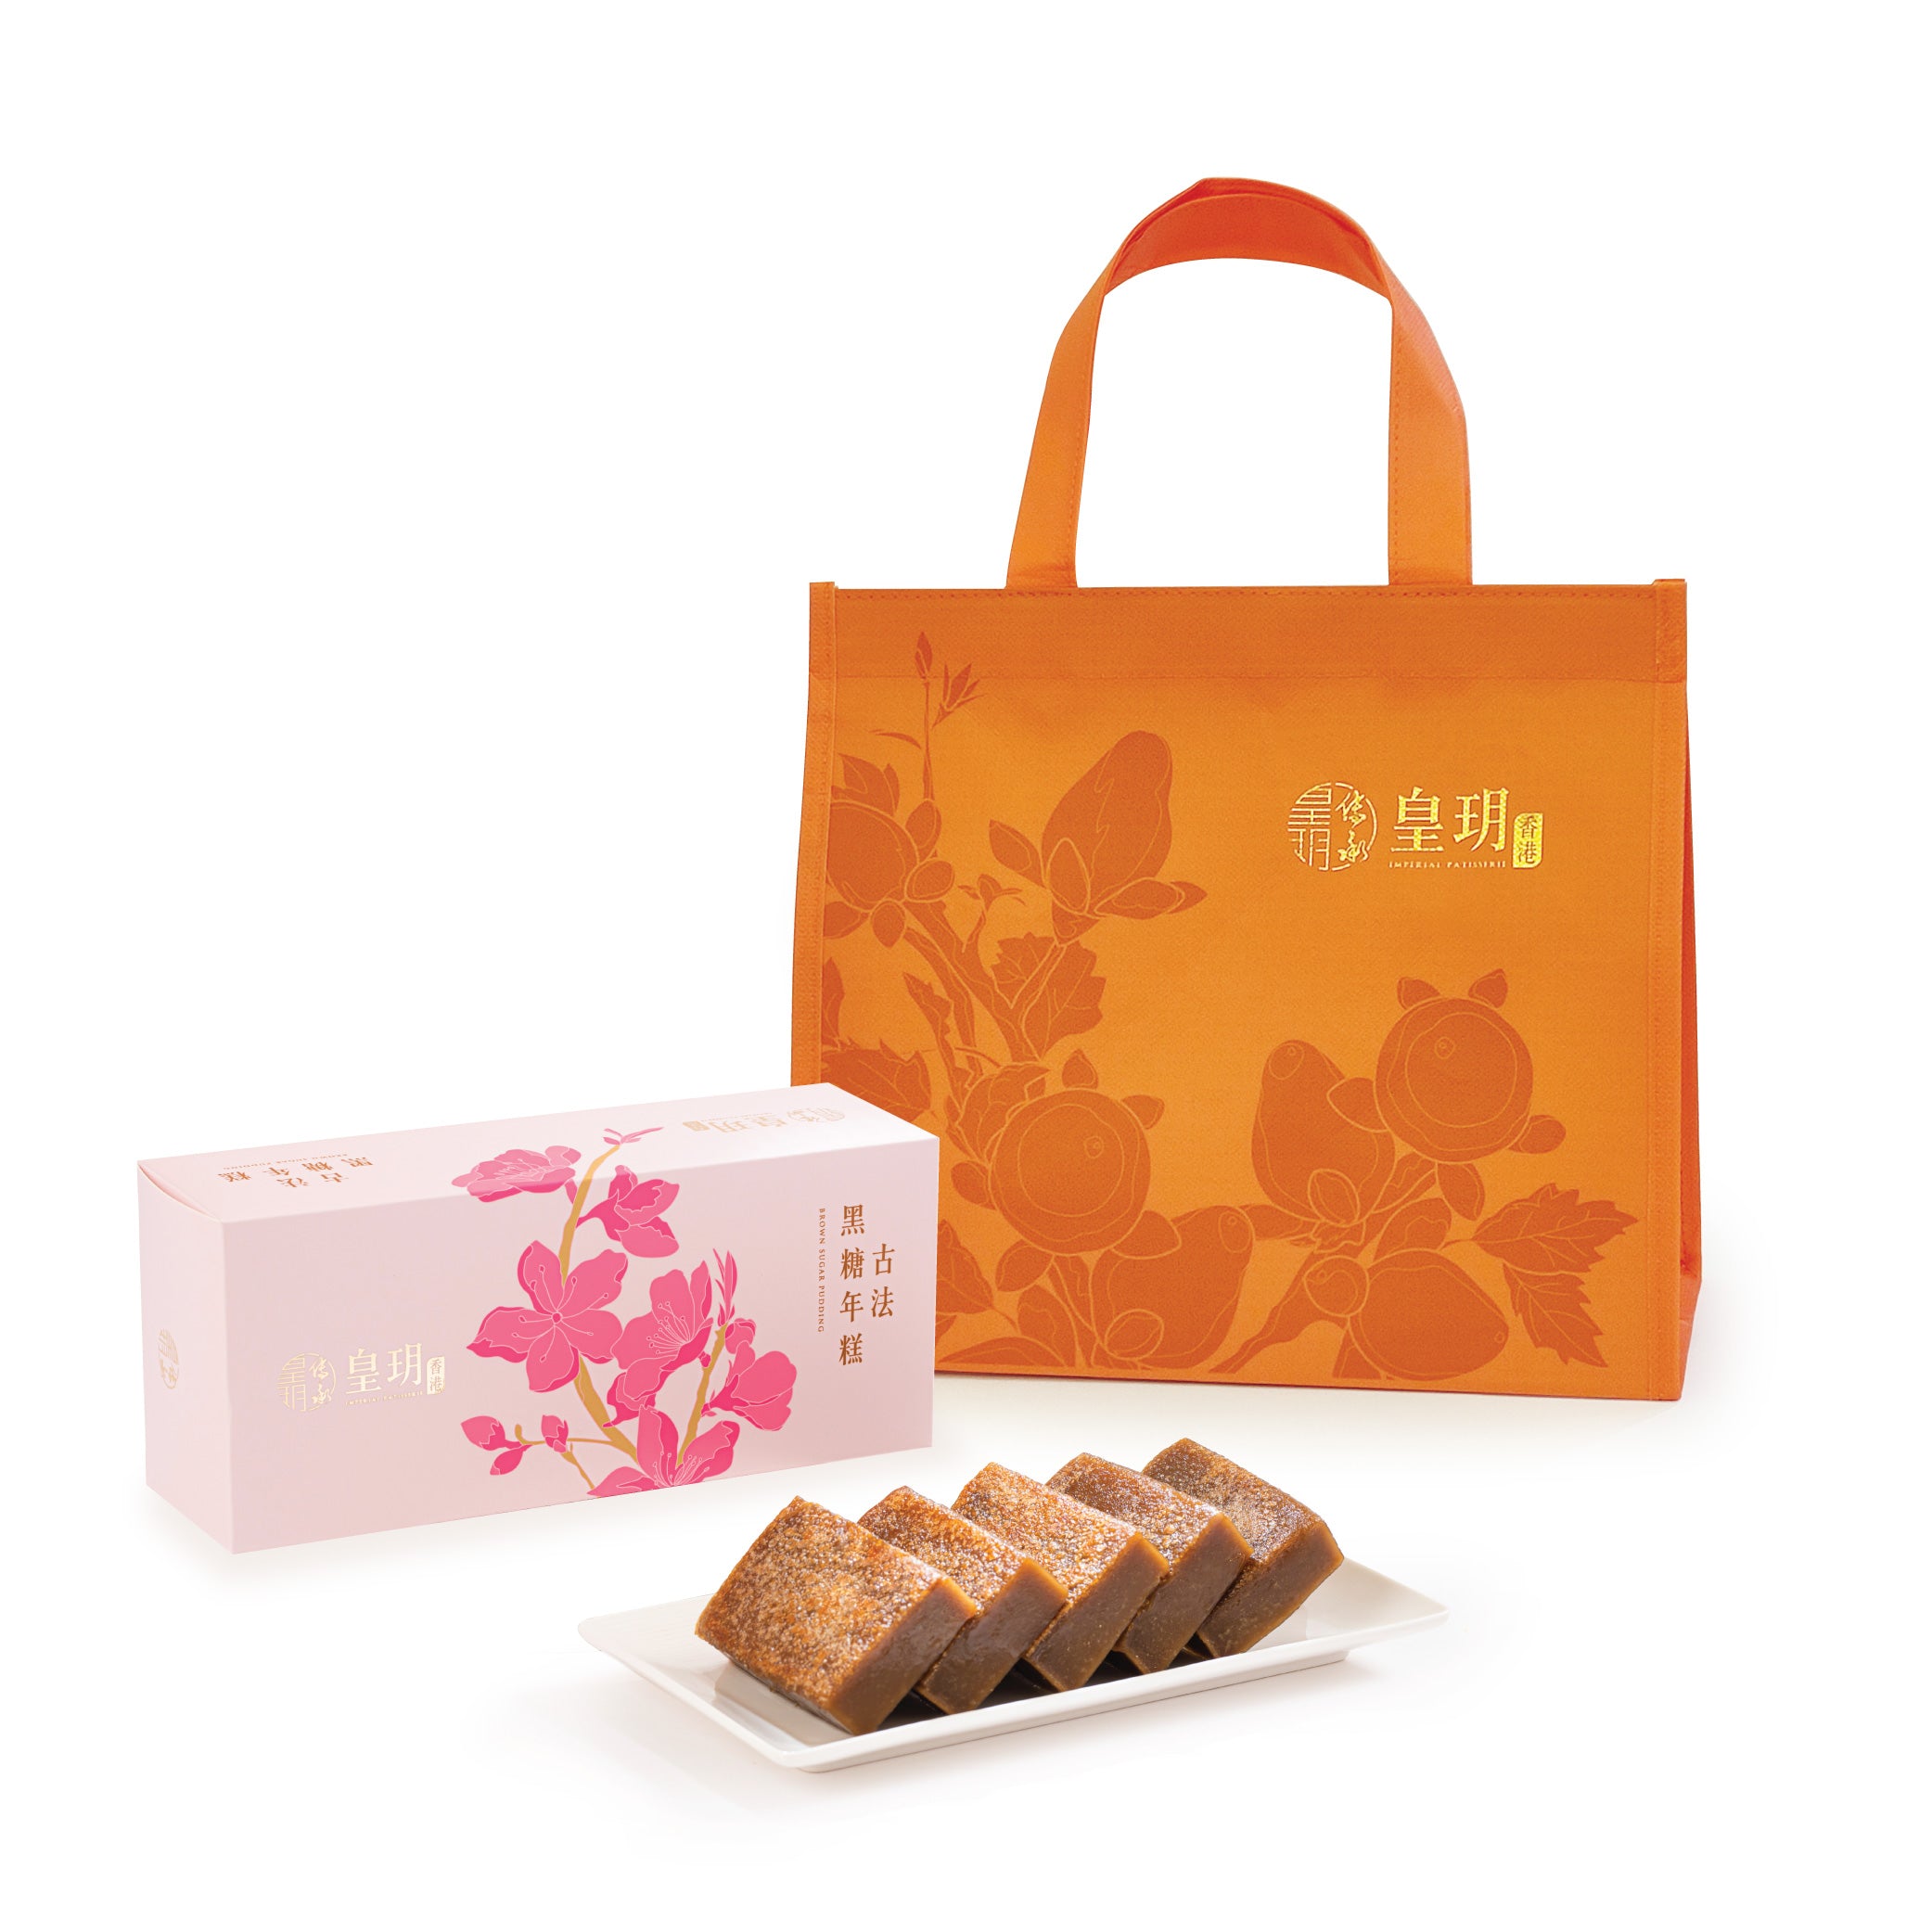 Imperial Patisserie | Brown Sugar Pudding Gift Box (Physical Coupon)